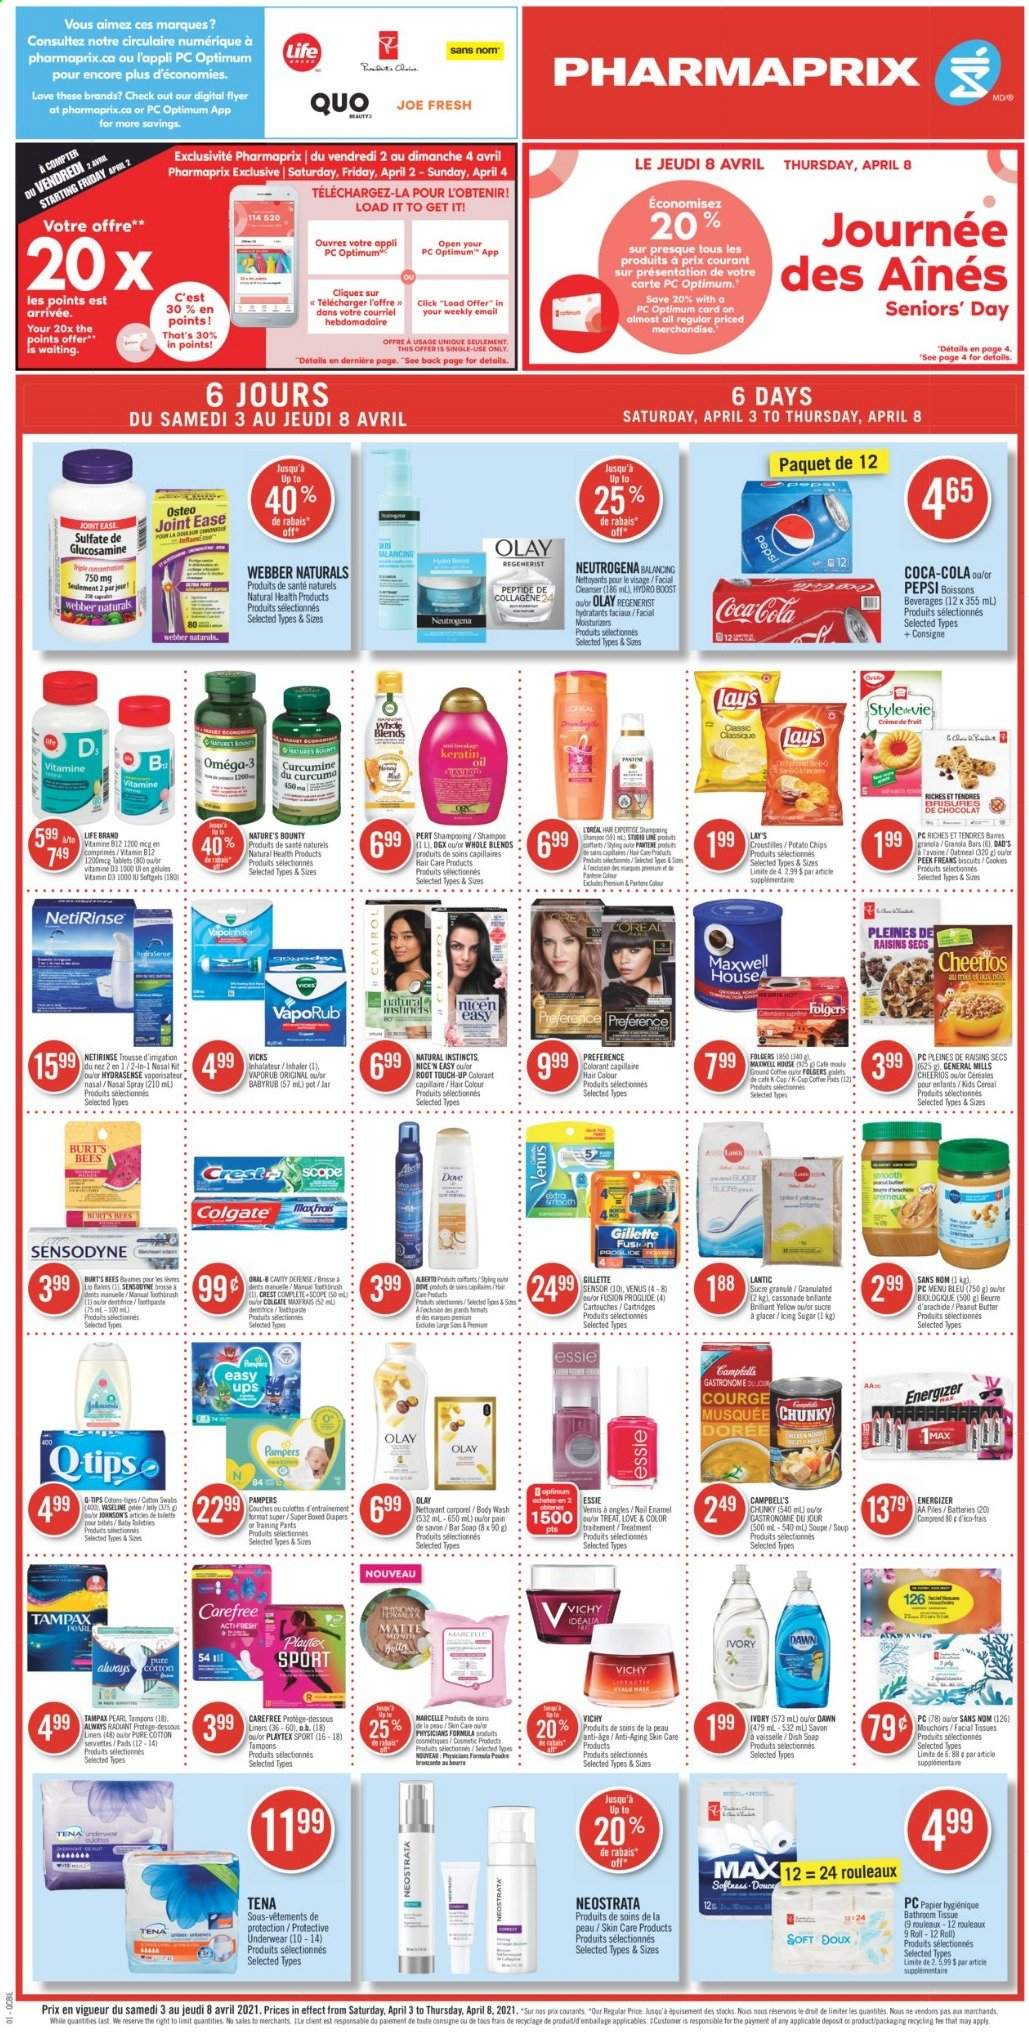 thumbnail - Pharmaprix Flyer - April 03, 2021 - April 08, 2021 - Sales products - Campbell's, soup, cookies, potato chips, Lay’s, sugar, icing sugar, cereals, Cheerios, granola bar, oil, peanut butter, dried fruit, Coca-Cola, Pepsi, Boost, Maxwell House, coffee, Folgers, pants, nappies, baby pants, bath tissue, Vichy, Vaseline, soap bar, soap, Crest, Playtex, Carefree, tampons, cleanser, L’Oréal, moisturizer, Olay, OGX, Root Touch-Up, hair color, keratin, Venus, nail enamel, cup, jar, battery, glucosamine, Nature's Bounty, Omega-3, VapoRub, nasal spray, Gillette, Neutrogena, raisins, Tampax, Pampers, chips, Sensodyne. Page 1.